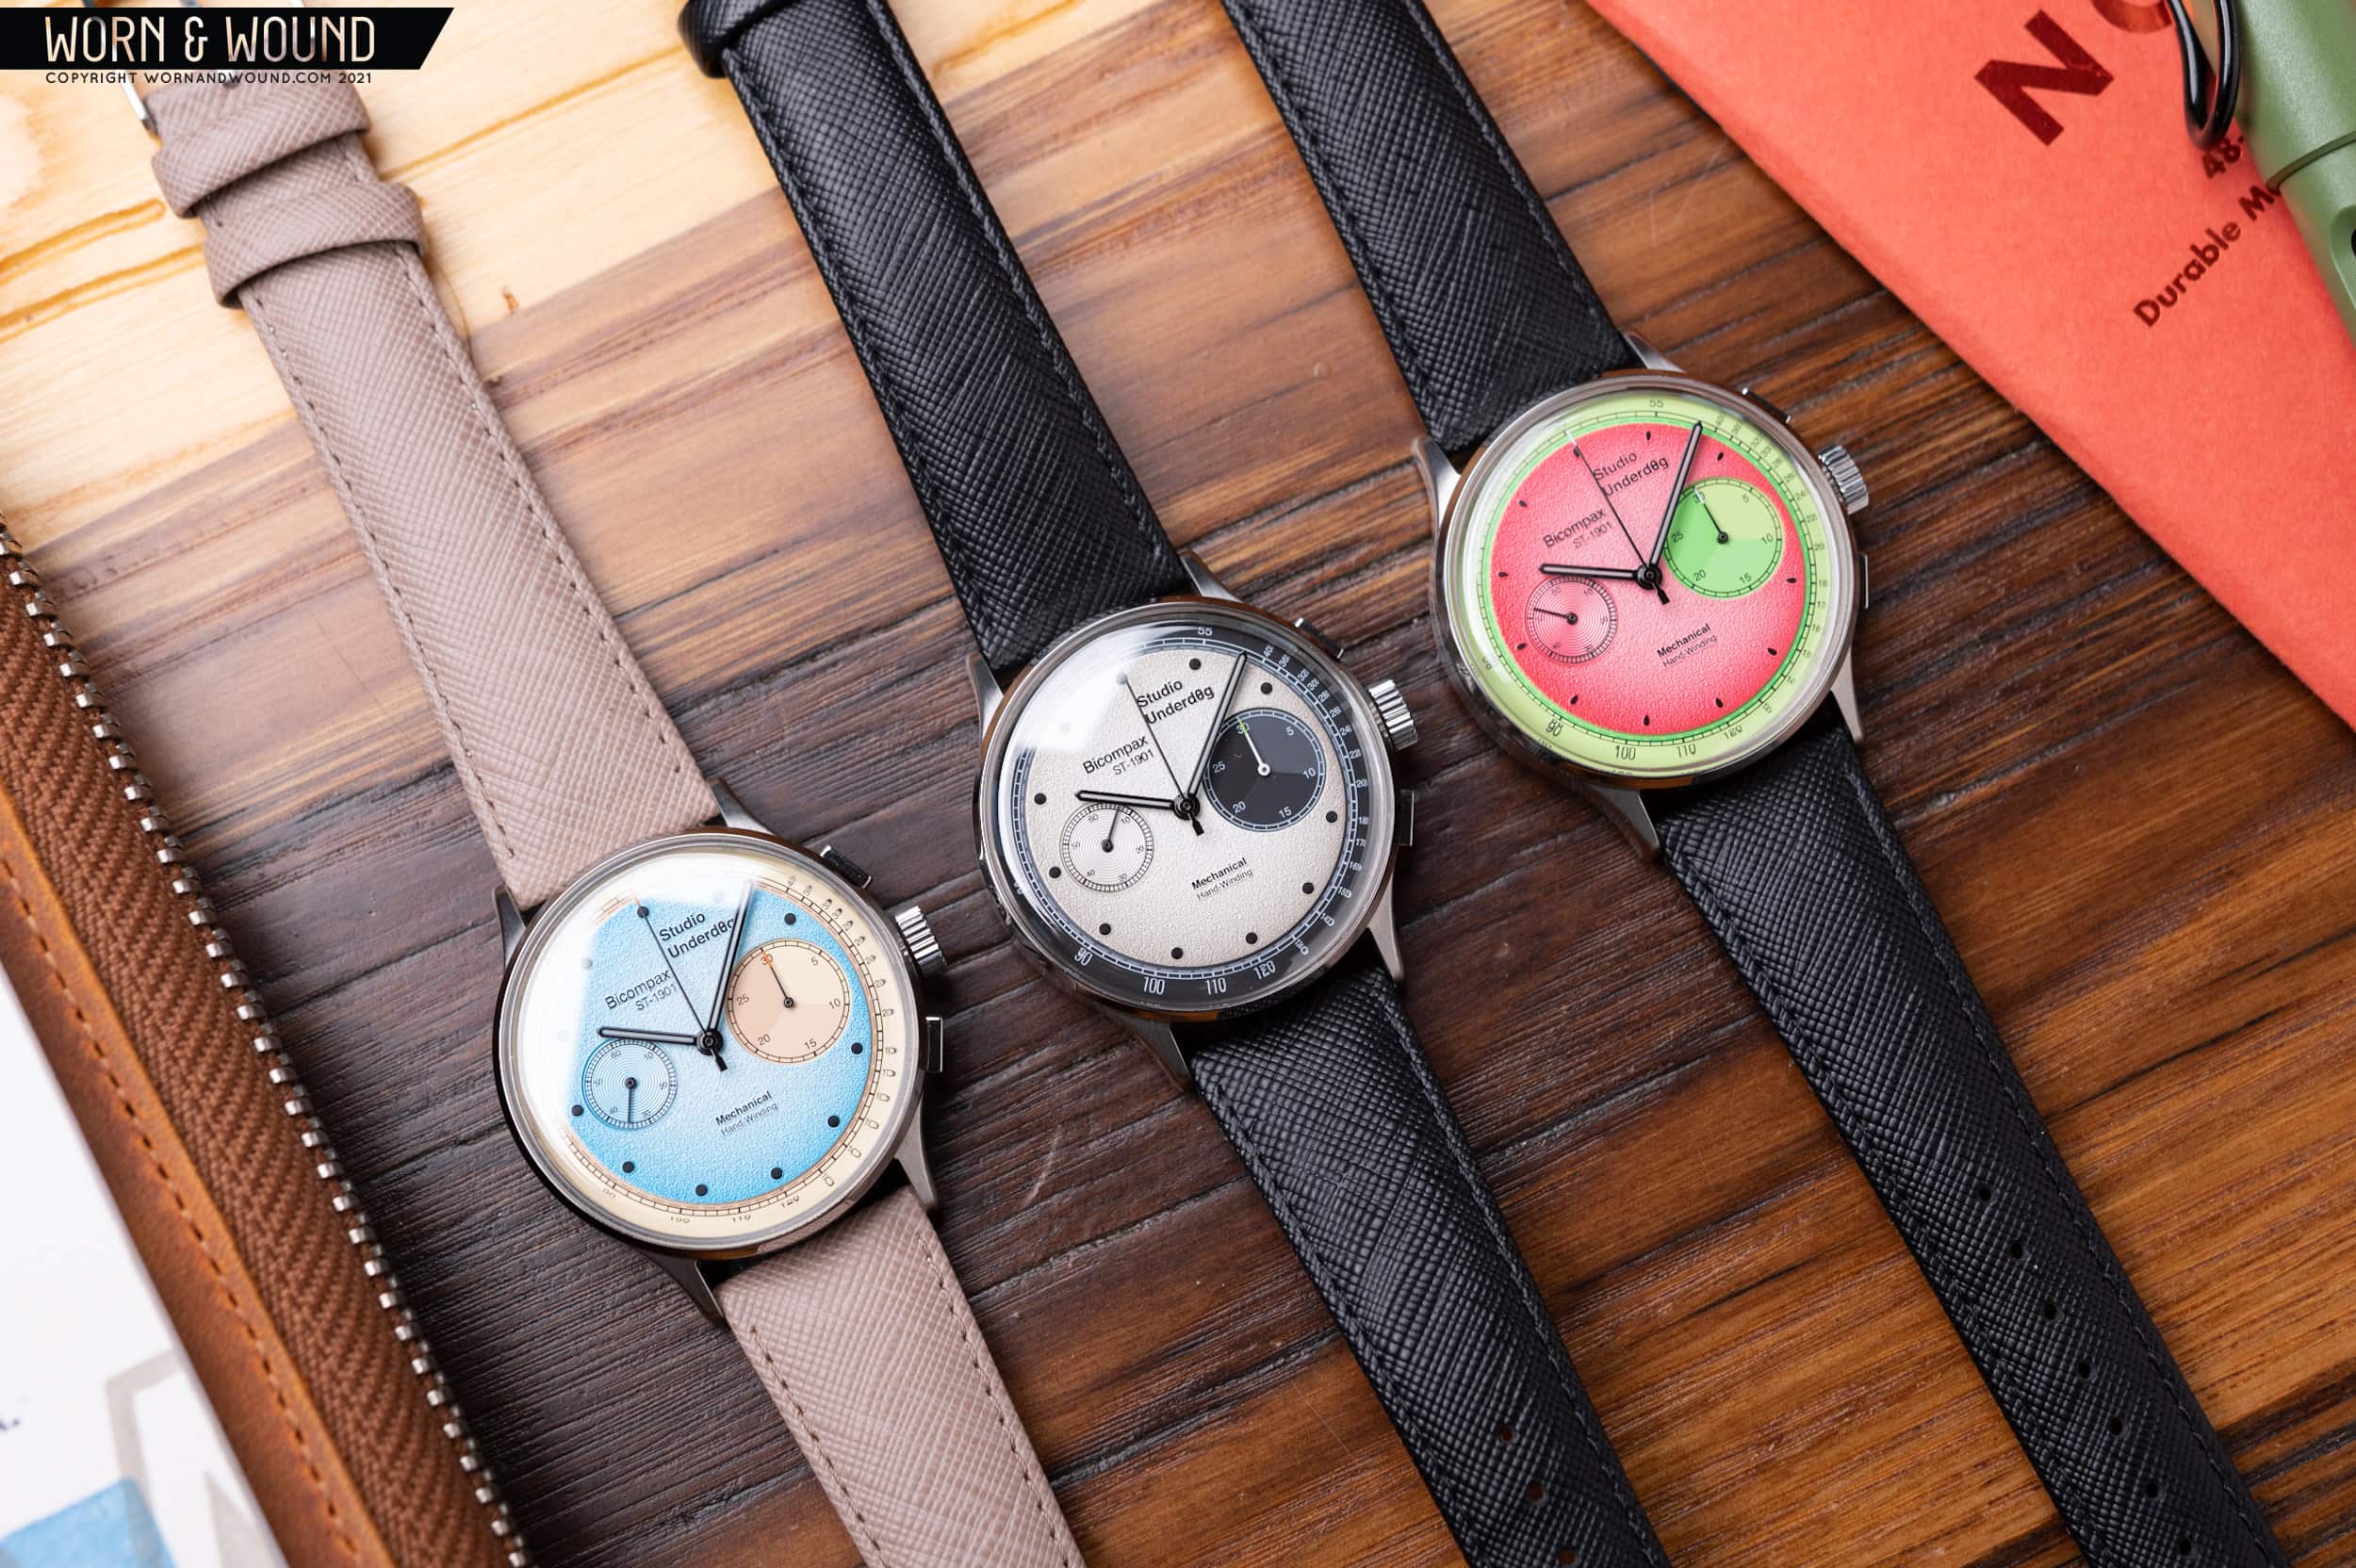 Review: The Colorful Studio Underd0g Chronographs